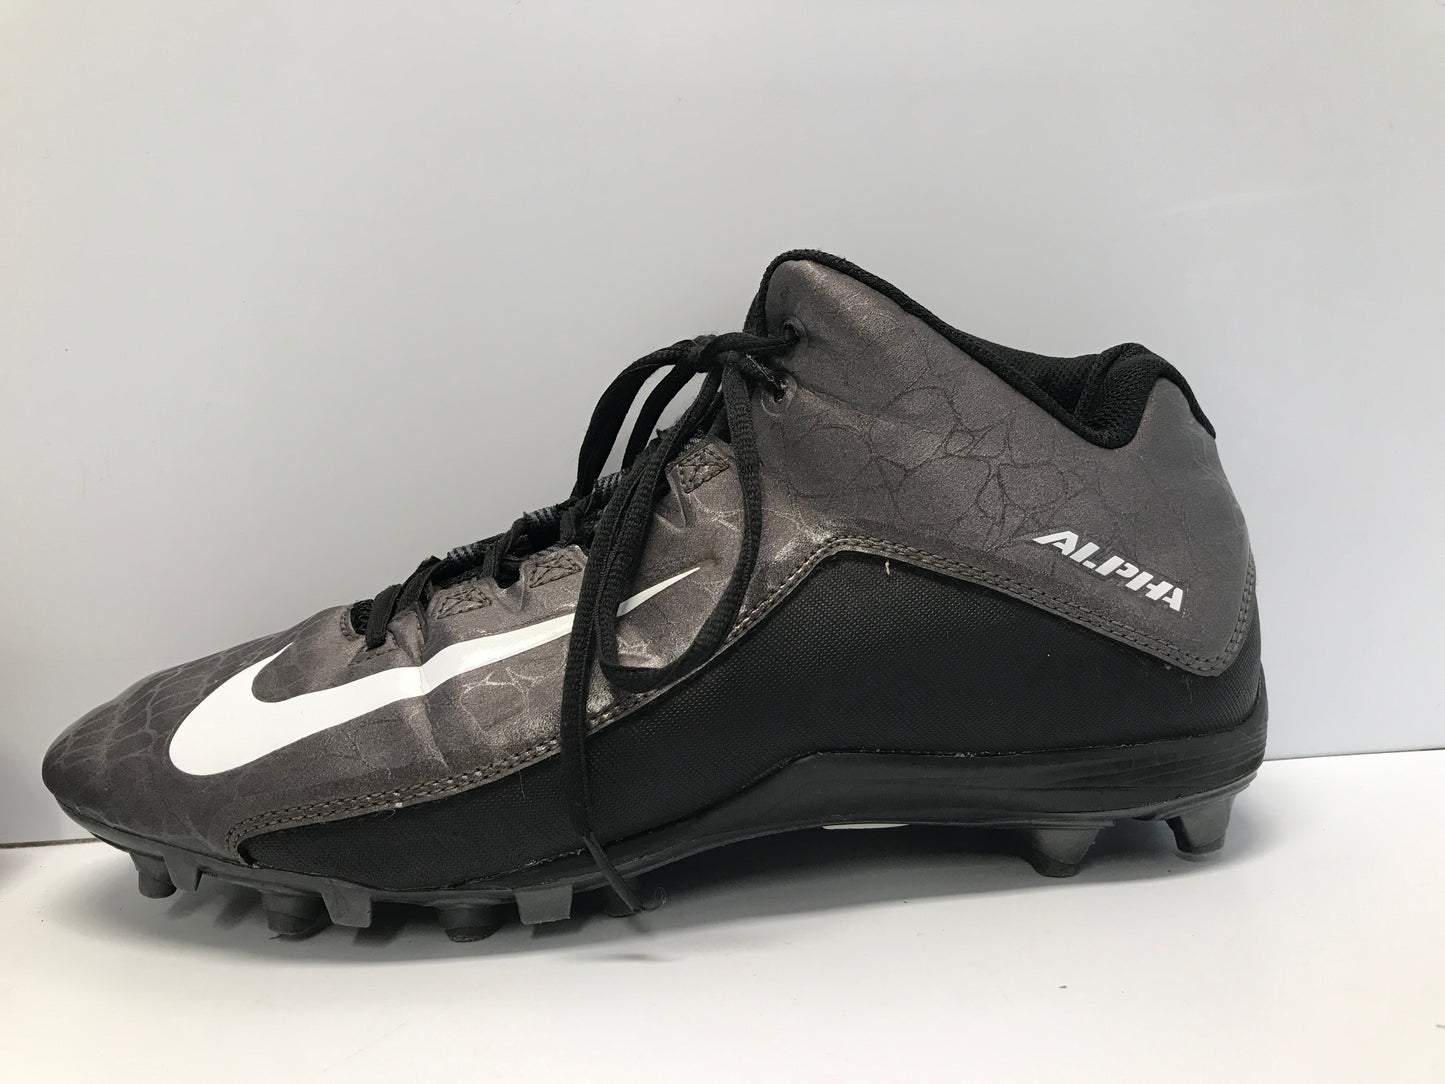 Baseball Football Rugby Soccer Shoes Cleats Men's Size 11.5 Nike Alpha High Tops Black Grey Excellent